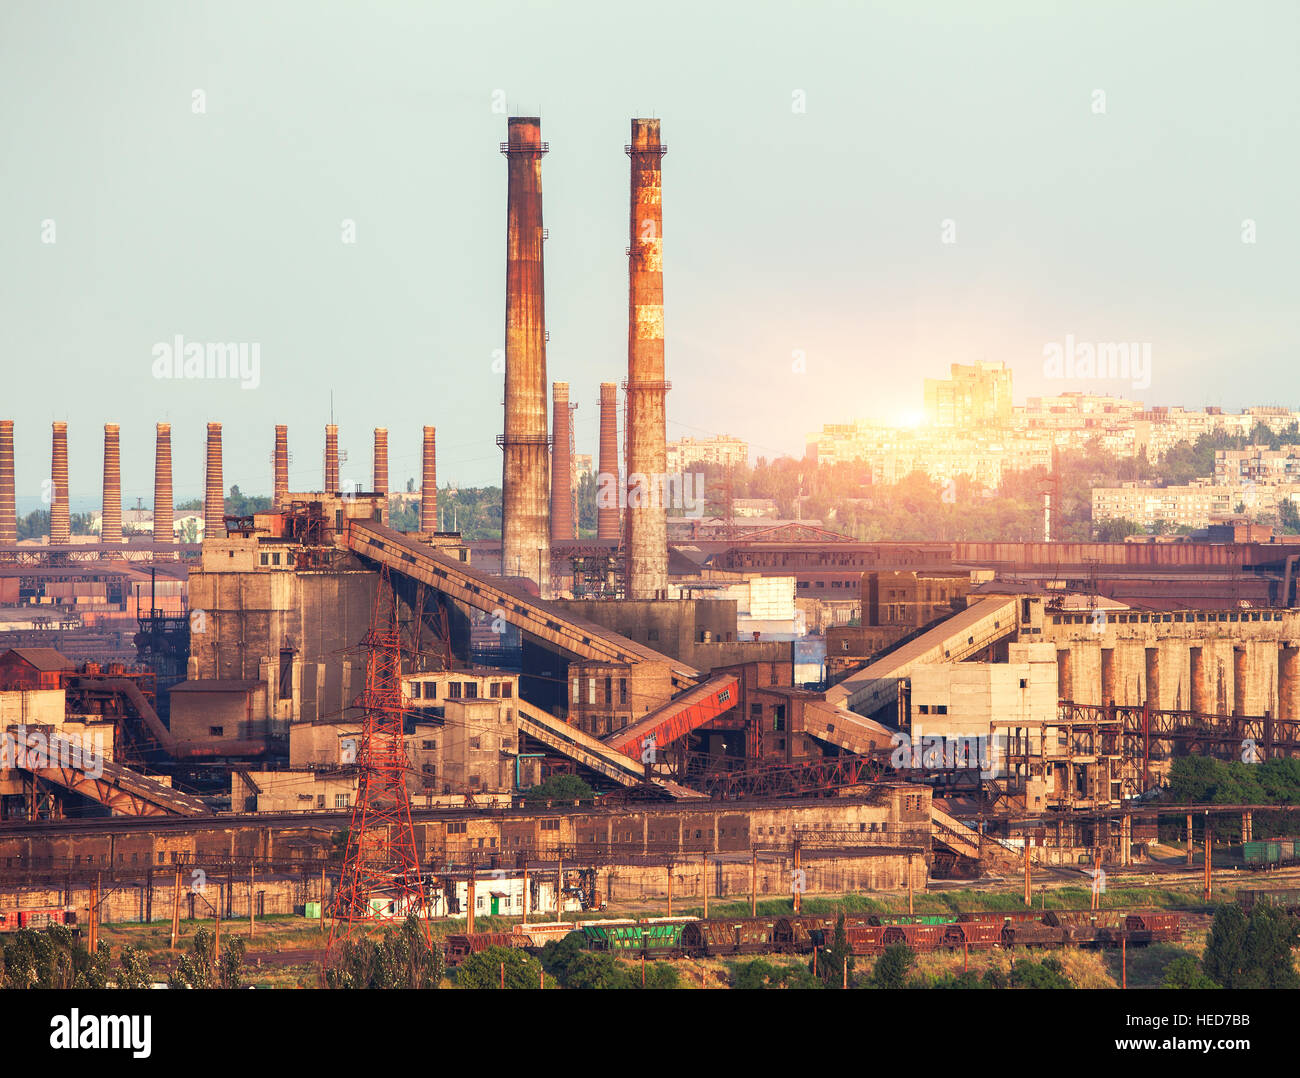 Metallurgical plant at colorful sunset. Industrial landscape. Steel factory in the city. Steel works, iron works. Heavy industry Stock Photo